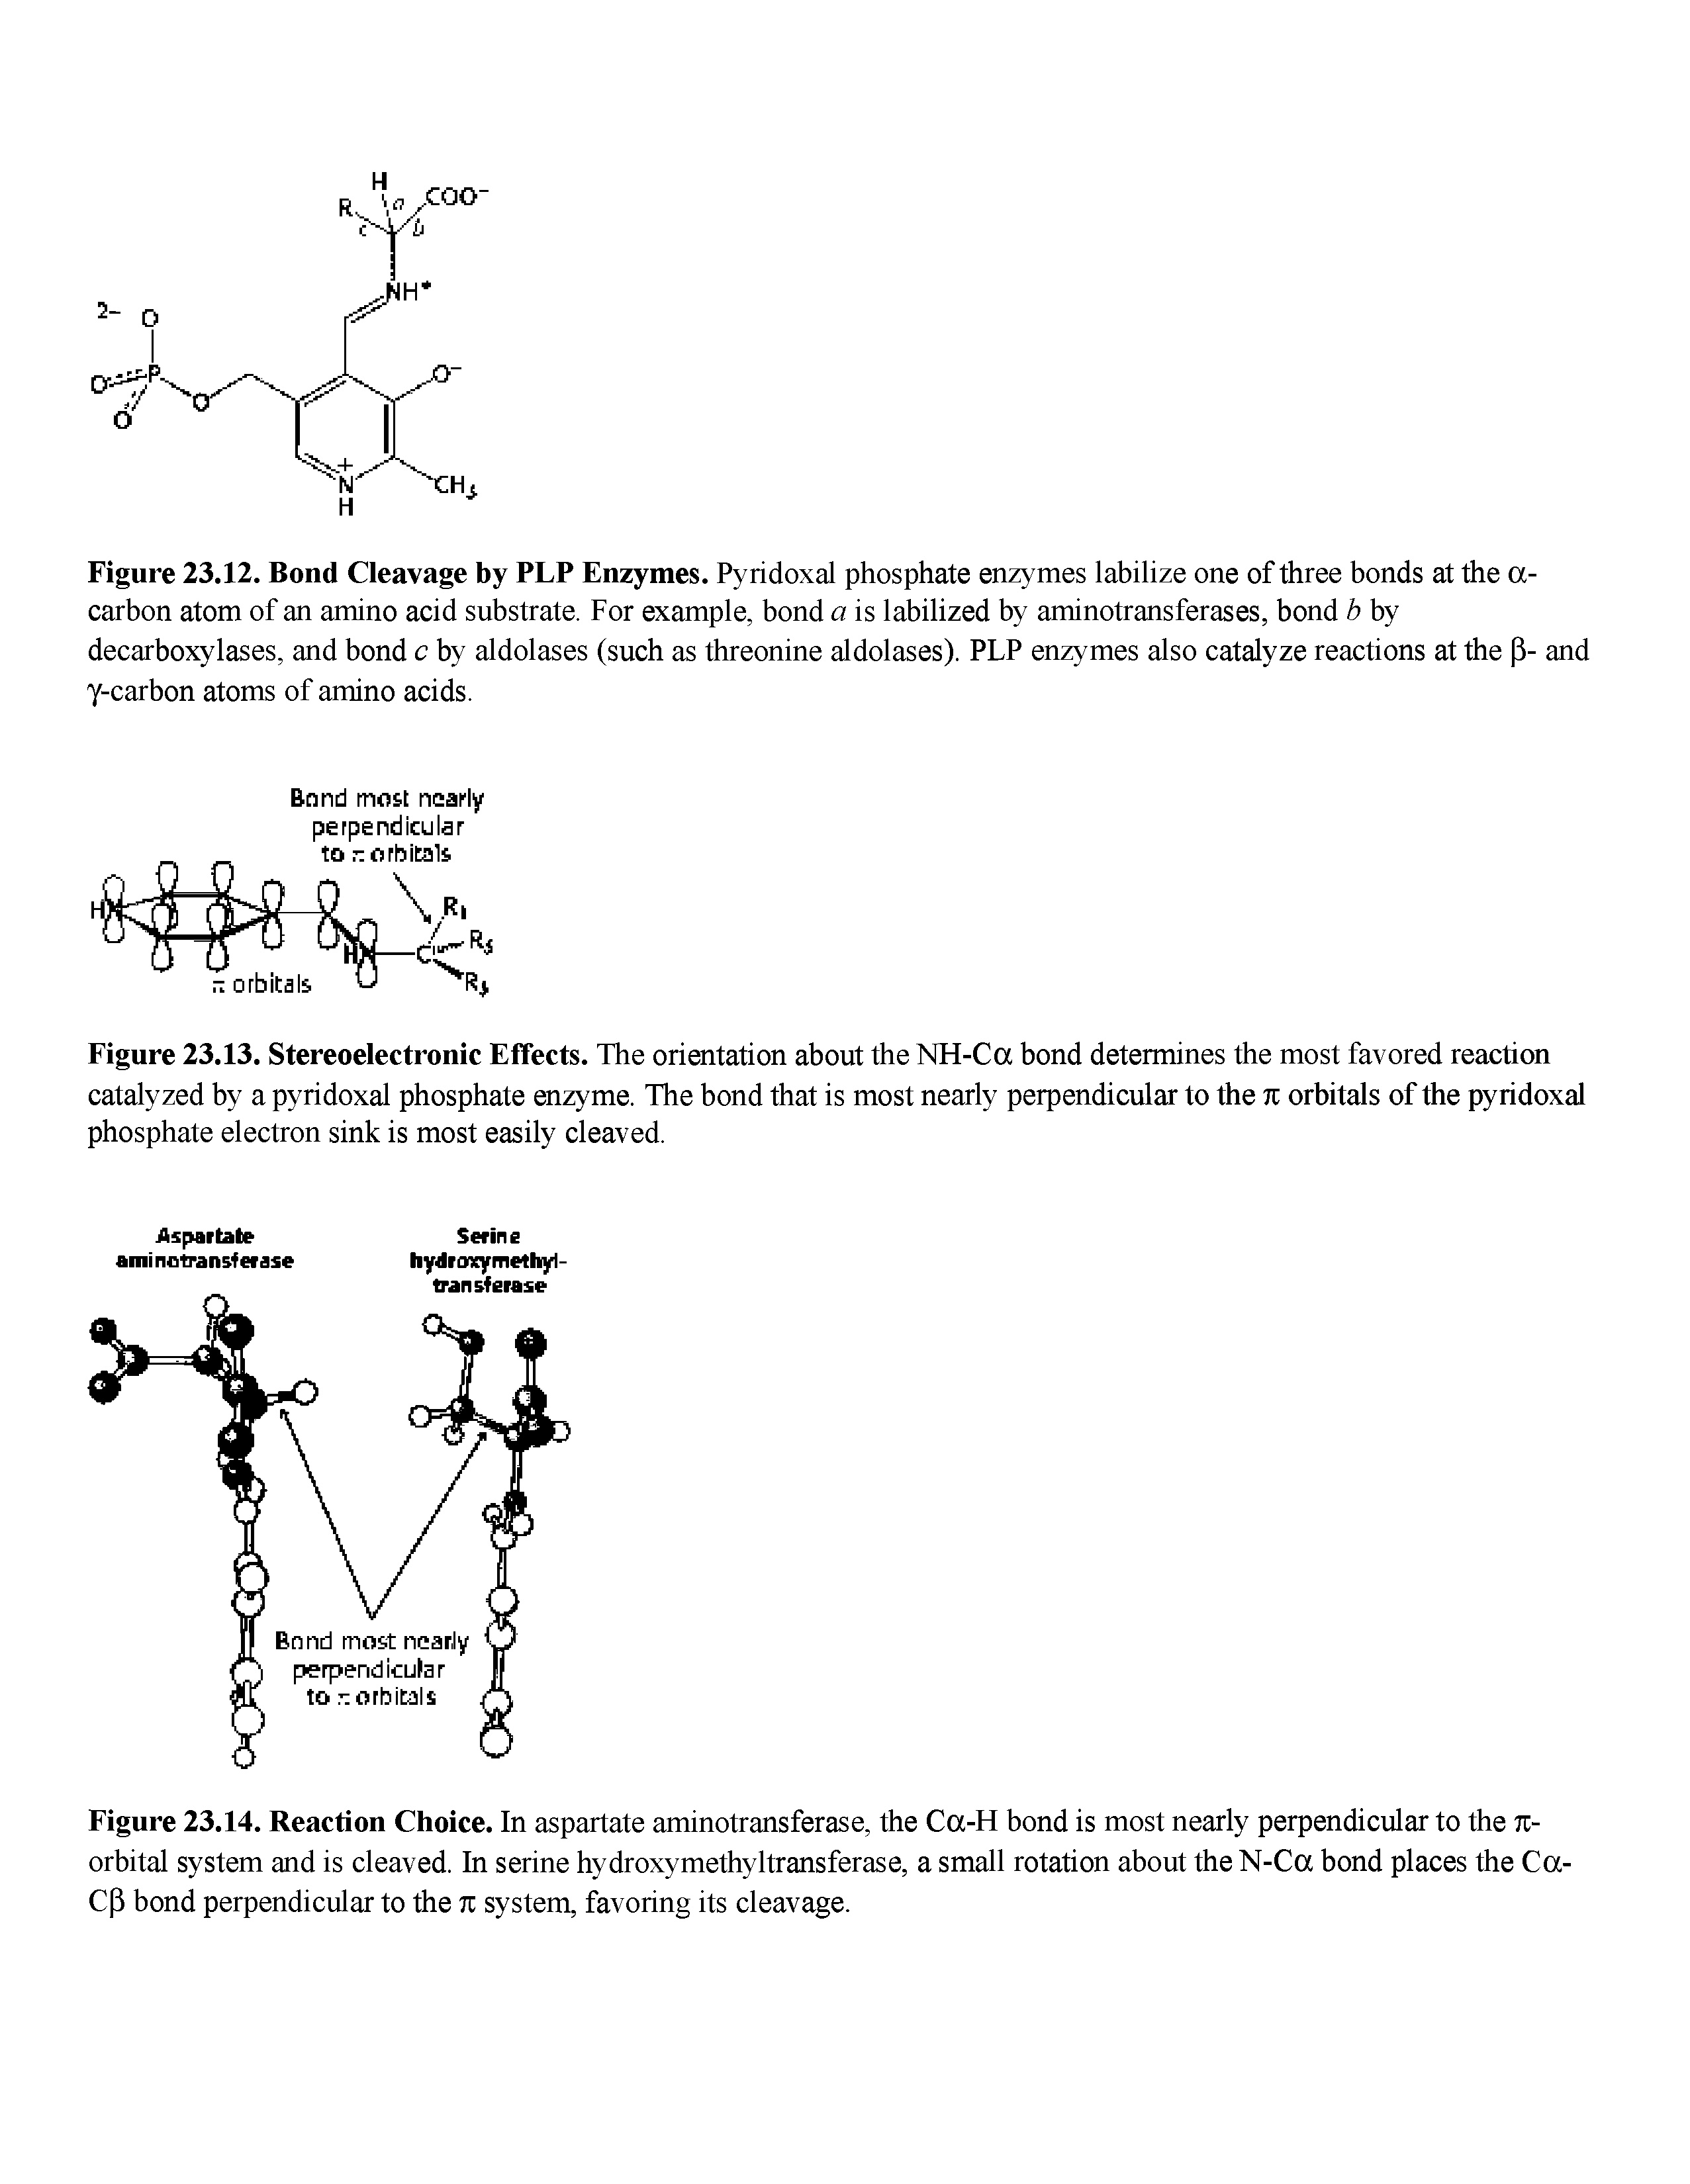 Figure 23.13. Stereoelectronic Effects. The orientation about the NH-Ca bond determines the most favored reaction catalyzed by a pyridoxal phosphate enzyme. The bond that is most nearly perpendicular to the 7i orbitals of the pyridoxal phosphate electron sink is most easily cleaved.